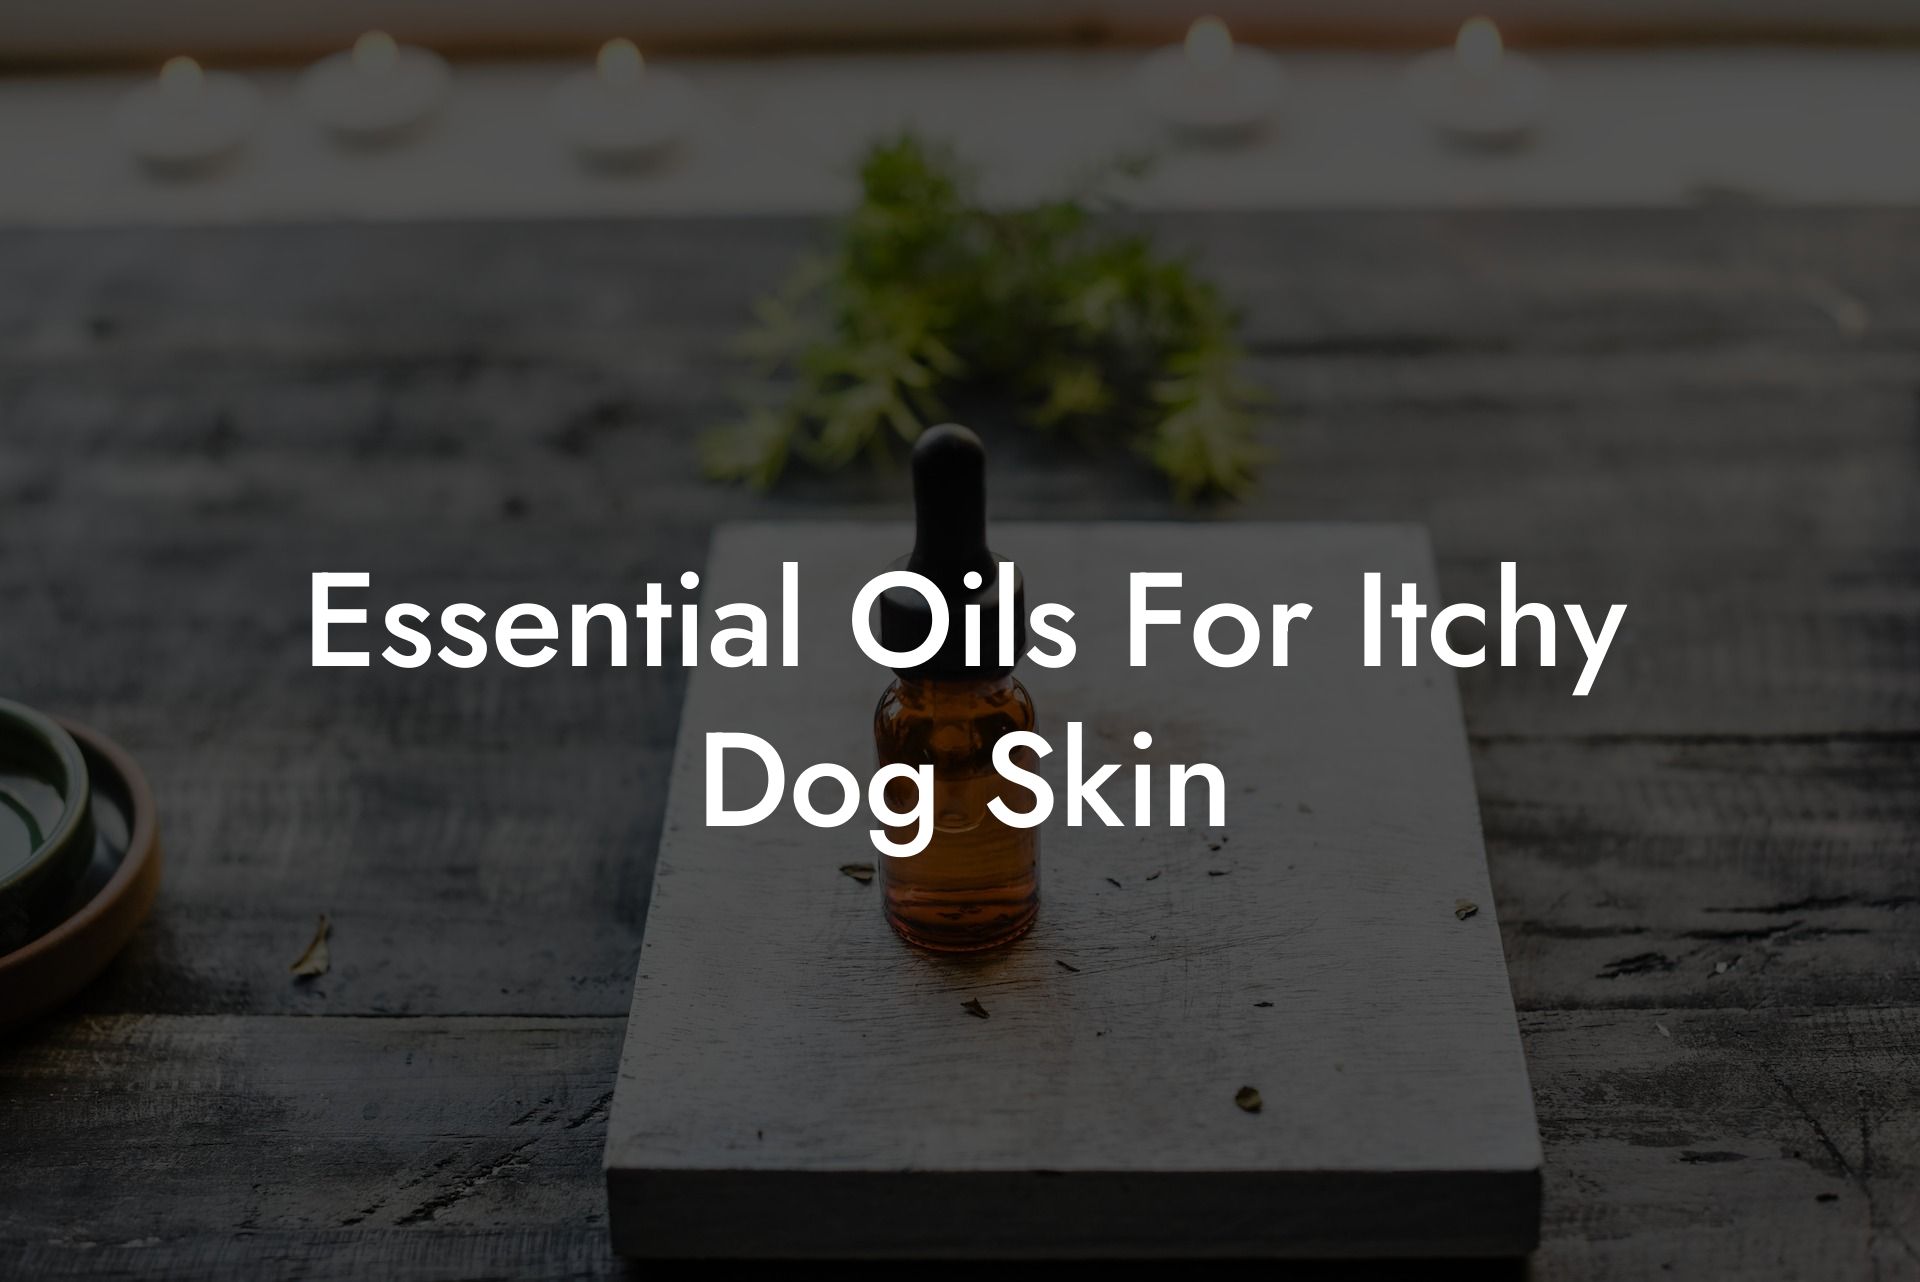 Essential Oils For Itchy Dog Skin